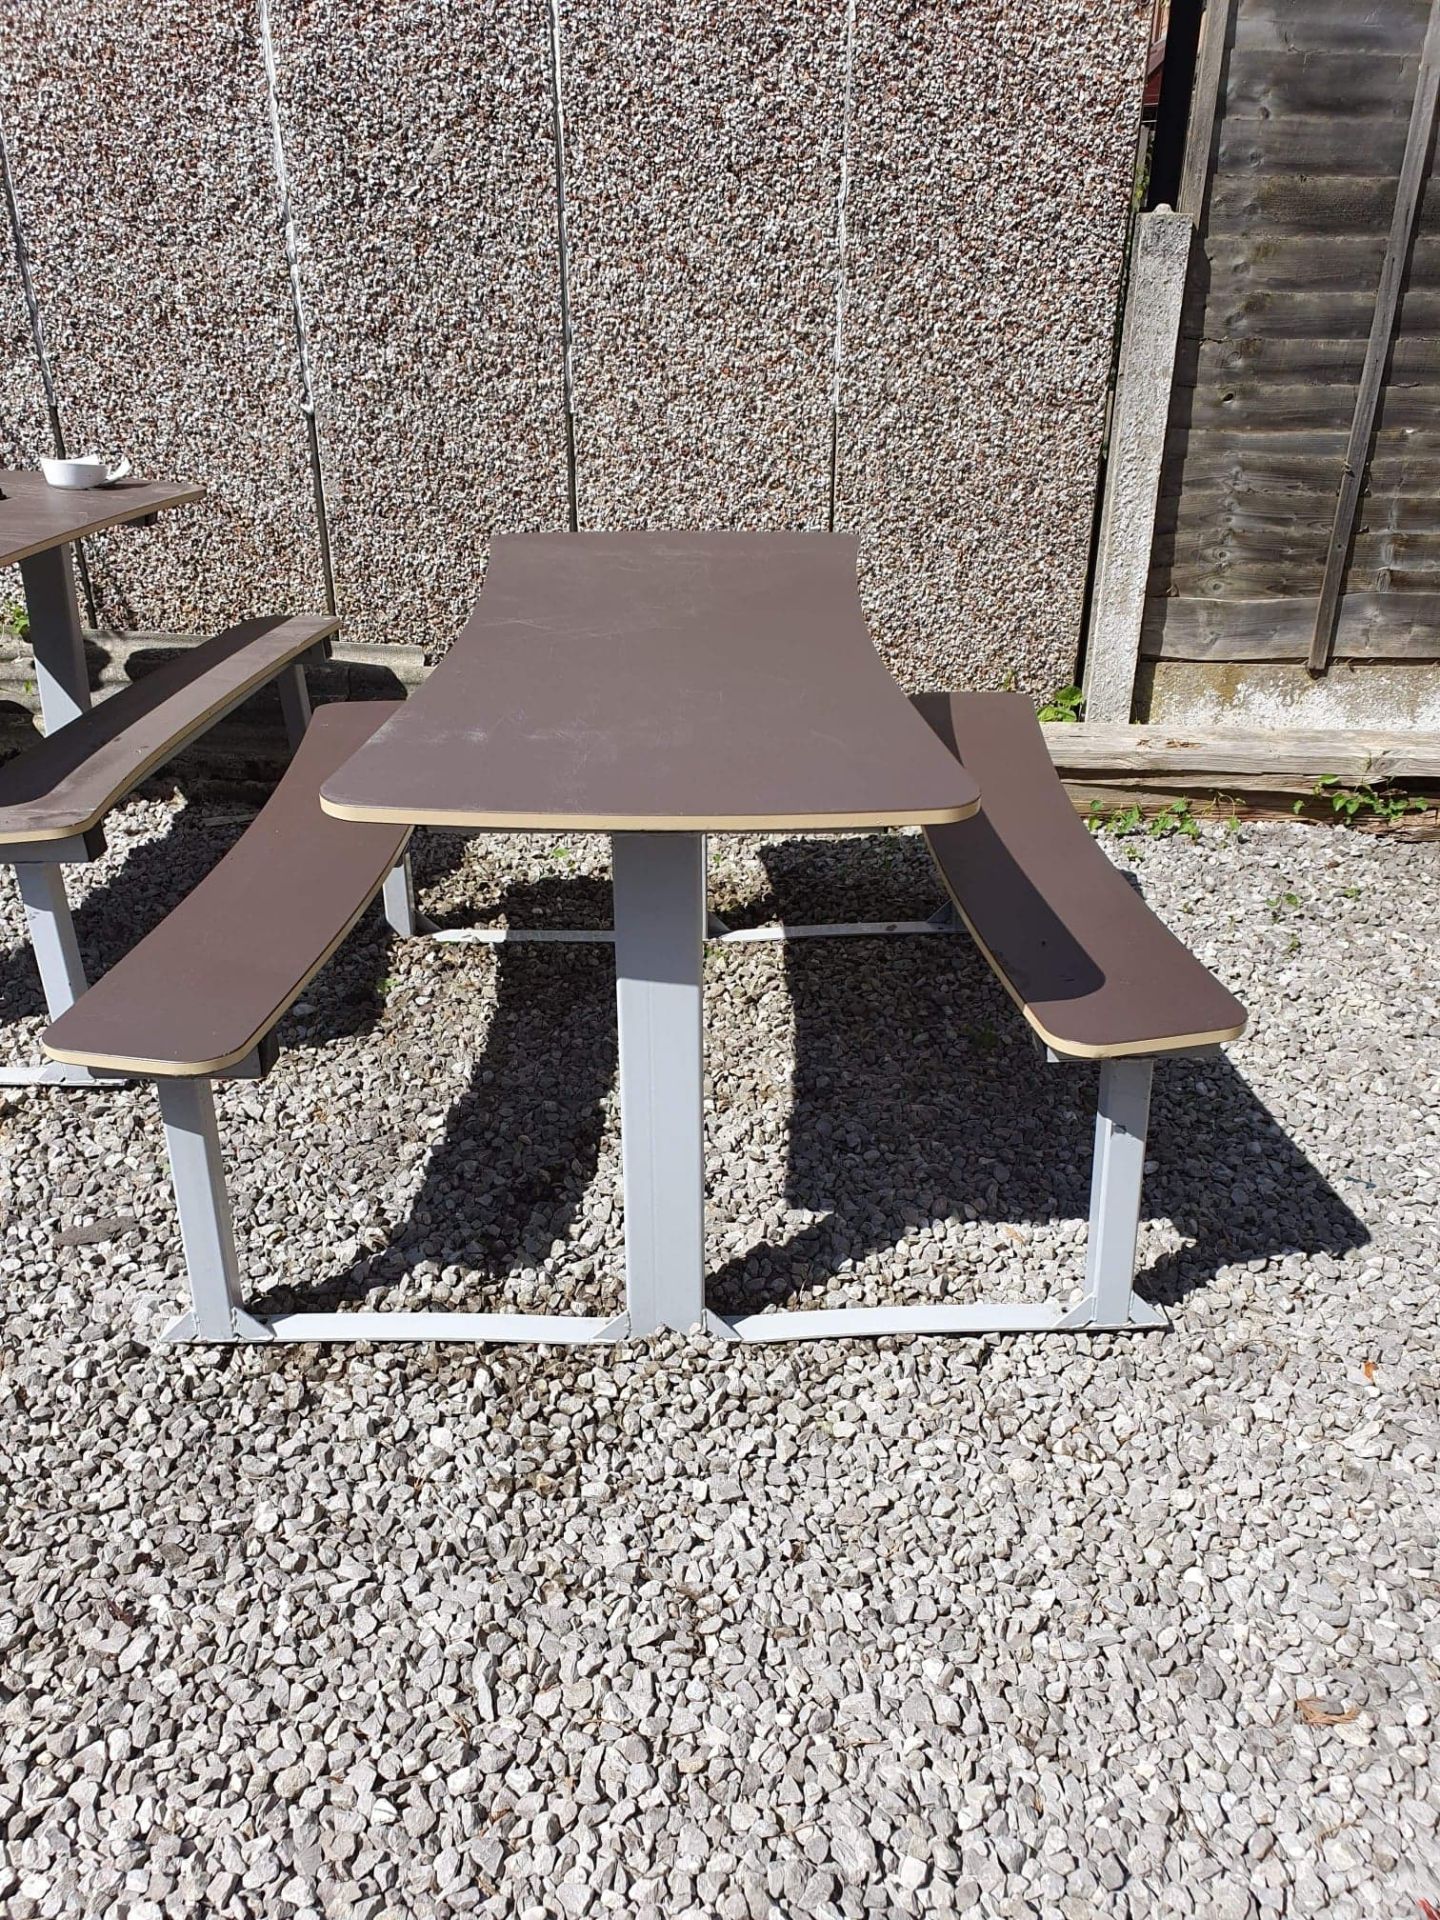 Commercial Outdoor bench seating x 5